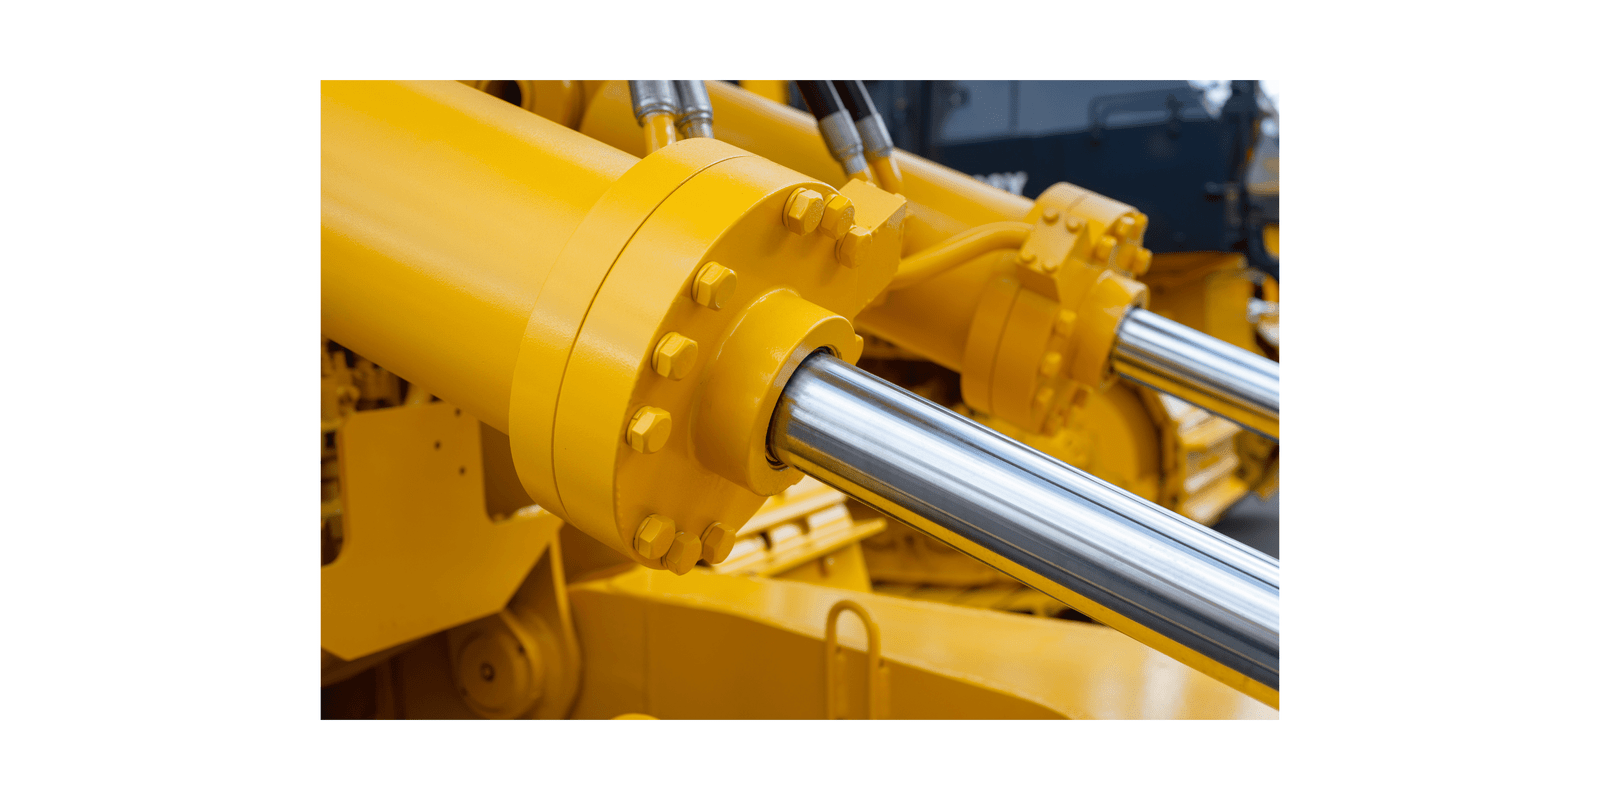 What To Do About Bent Hydraulic Cylinder Rods